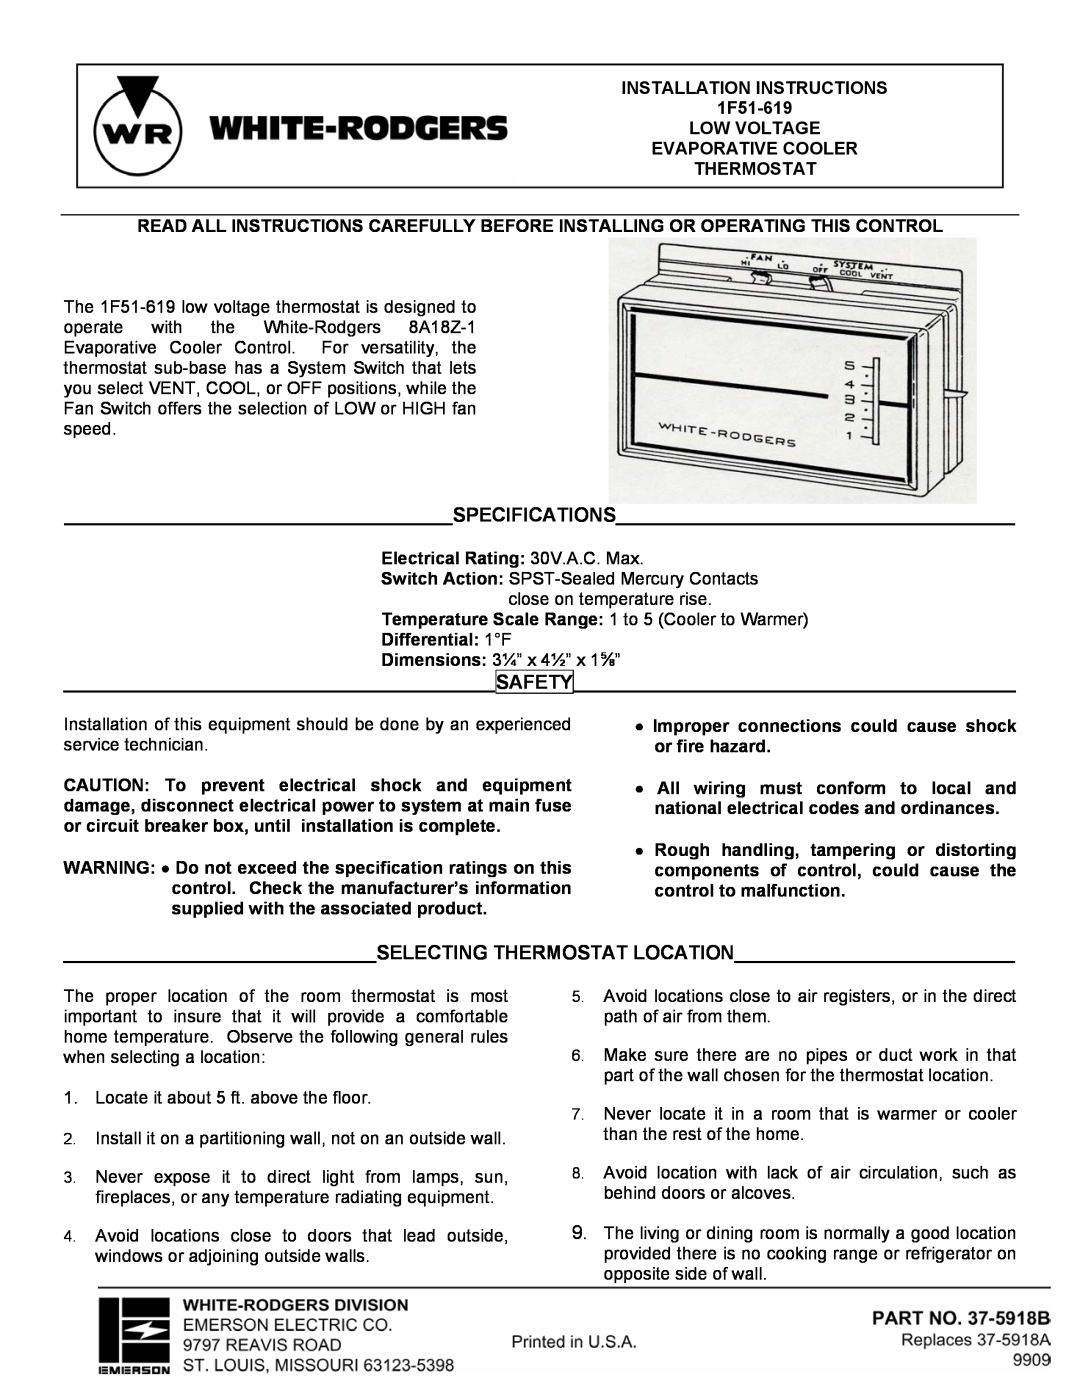 White Rodgers 8A18Z-2 installation instructions INSTALLATION INSTRUCTIONS 1F51-619 LOW VOLTAGE 